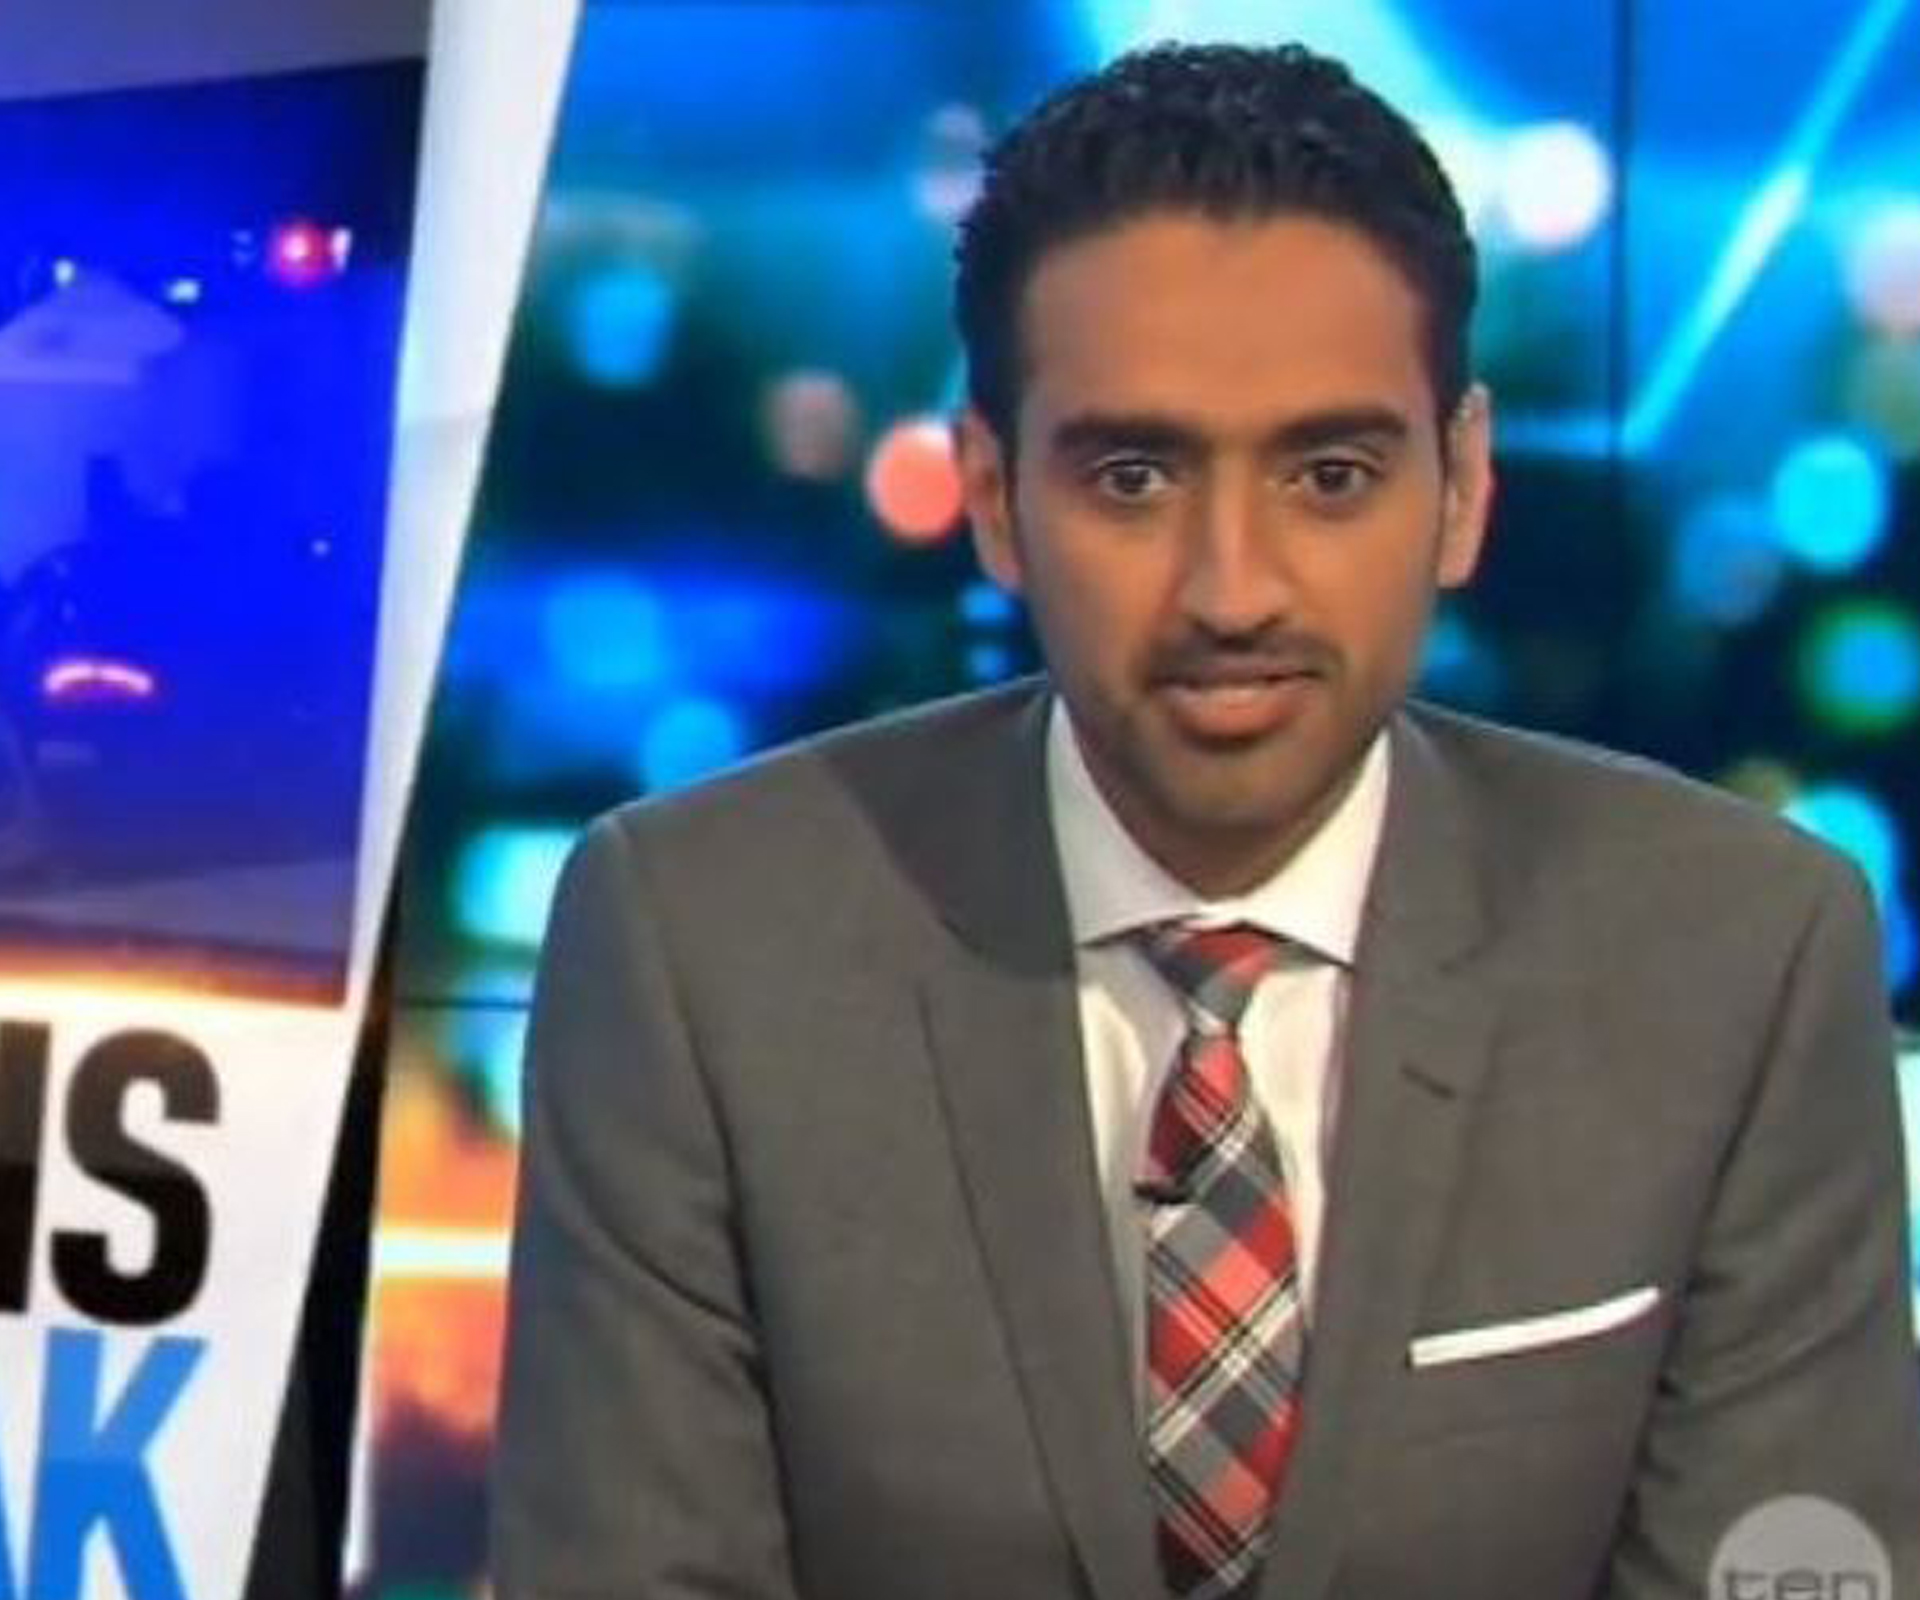 Waleed Aly says Australians are helping a “weak” Islamic State